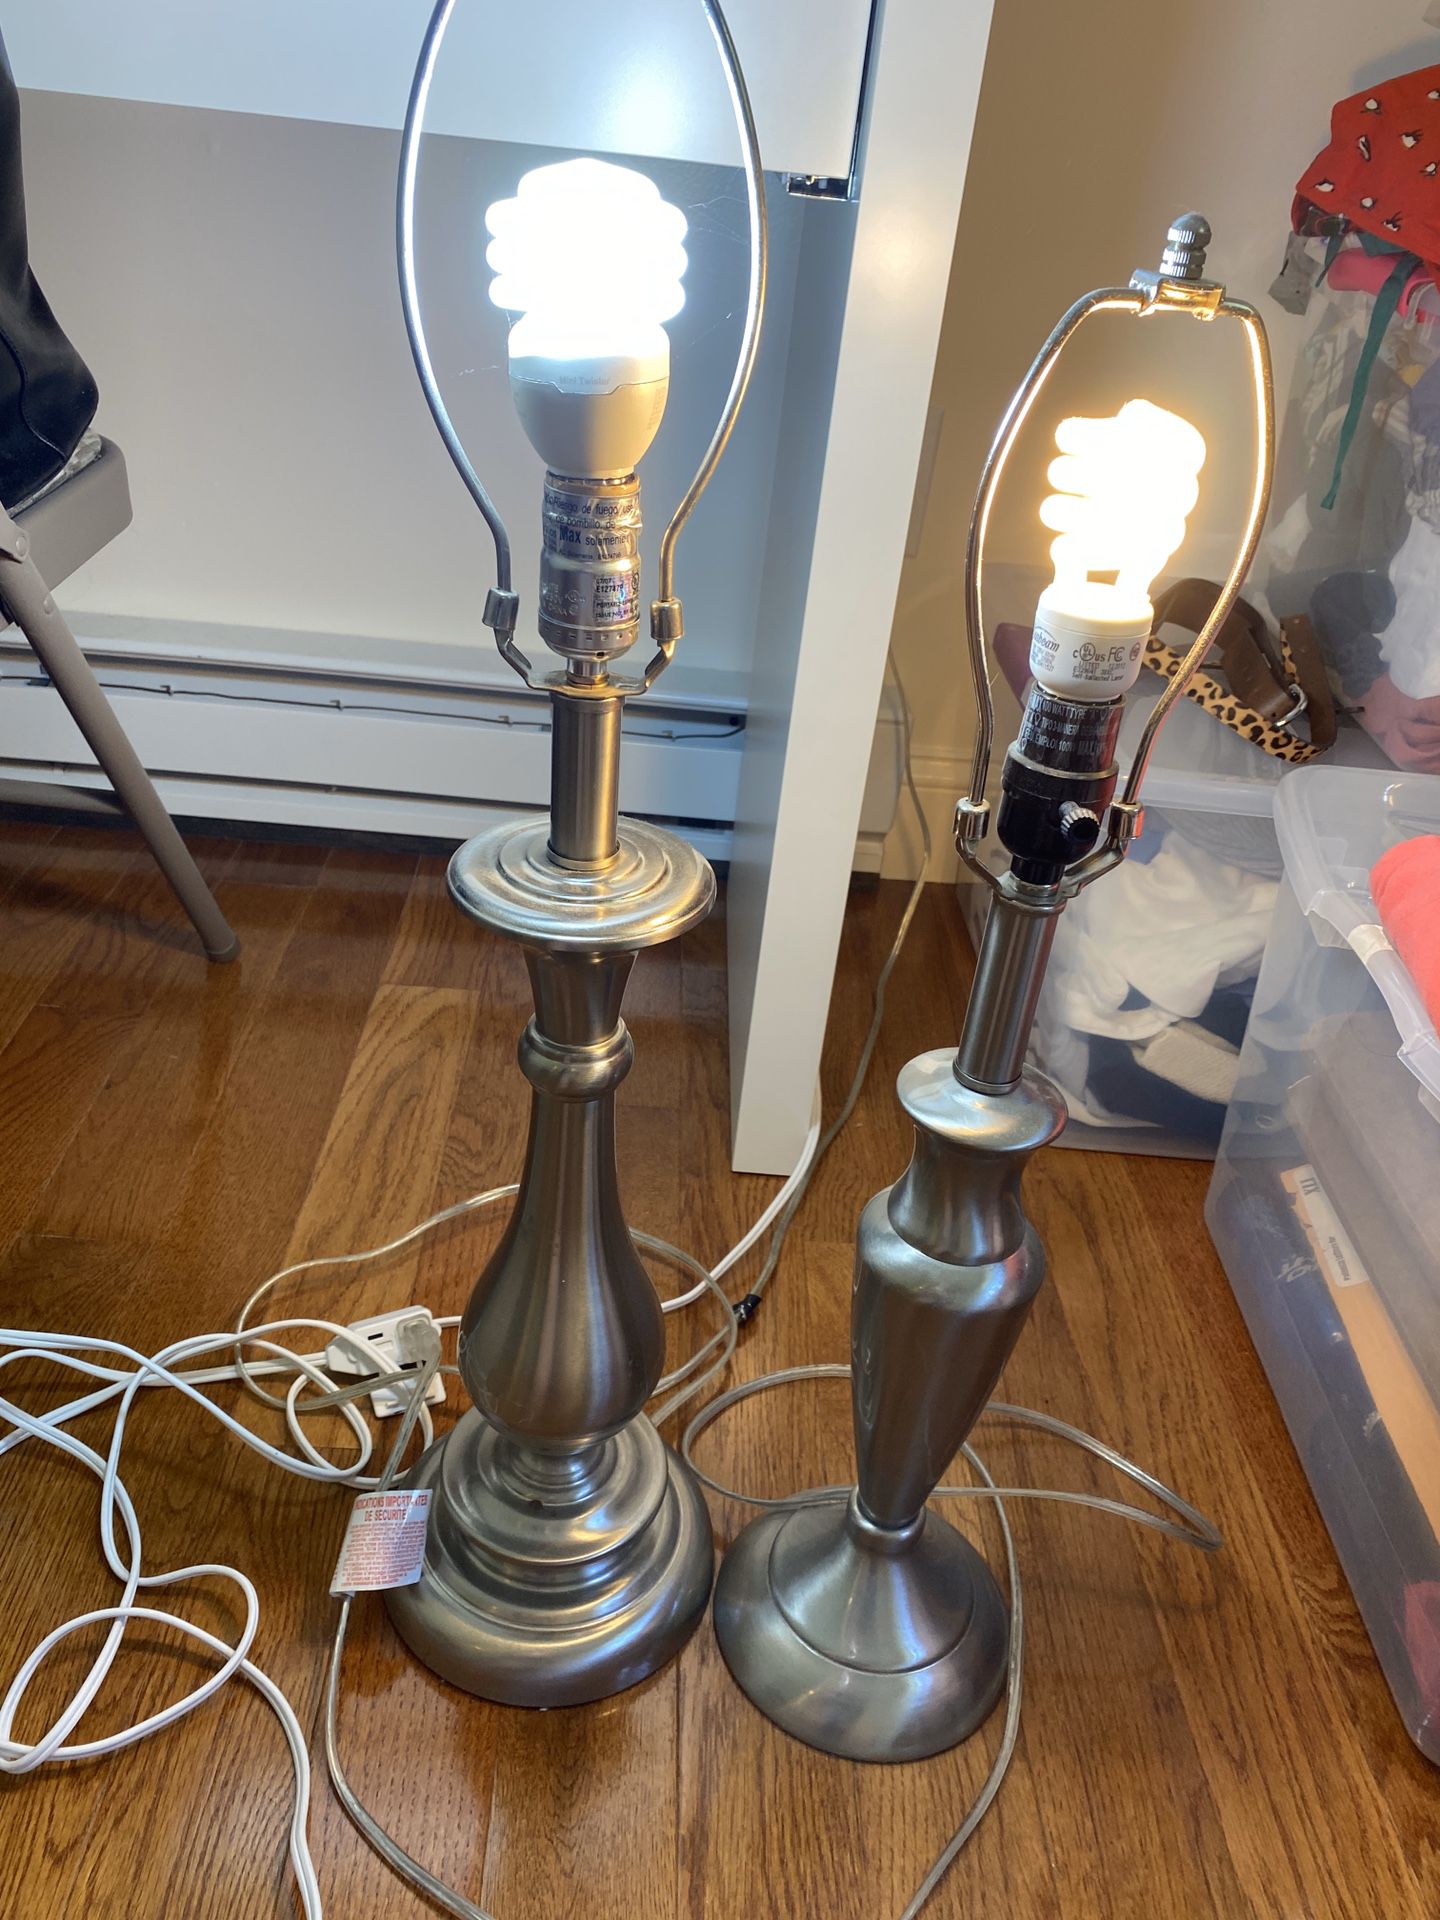 Set of two lamps